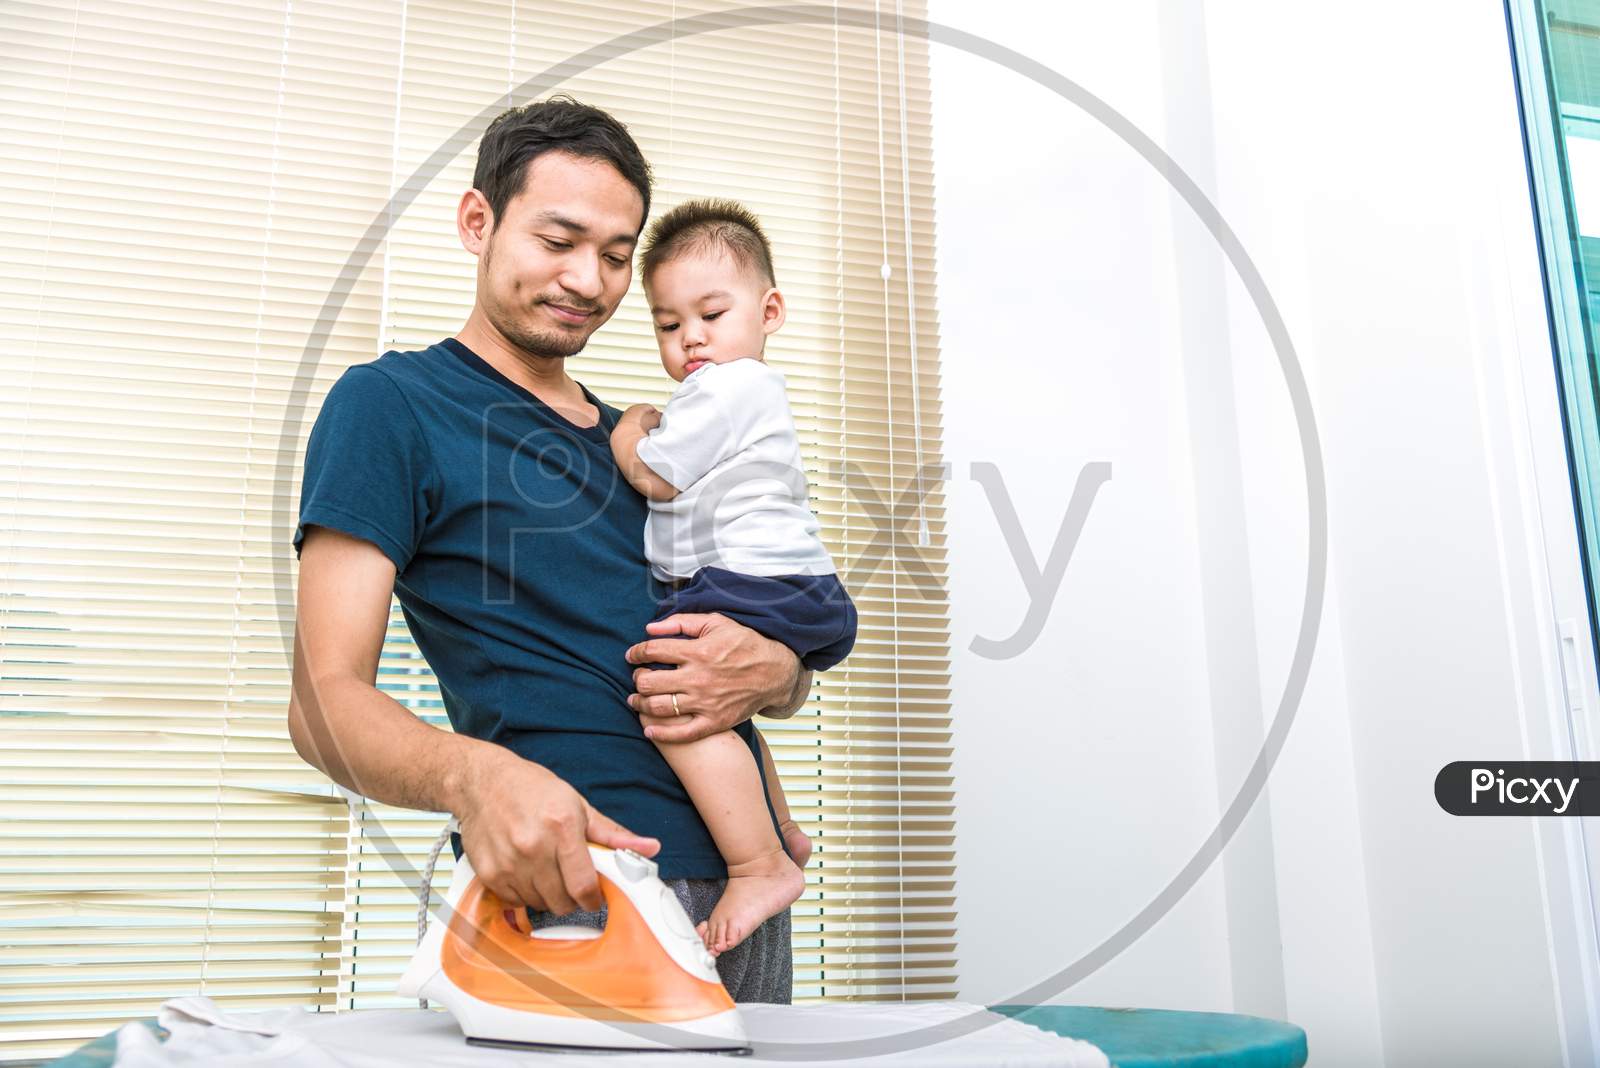 Single Dad Is Ironing While Carrying His Son. People And Lifestyles Concept.